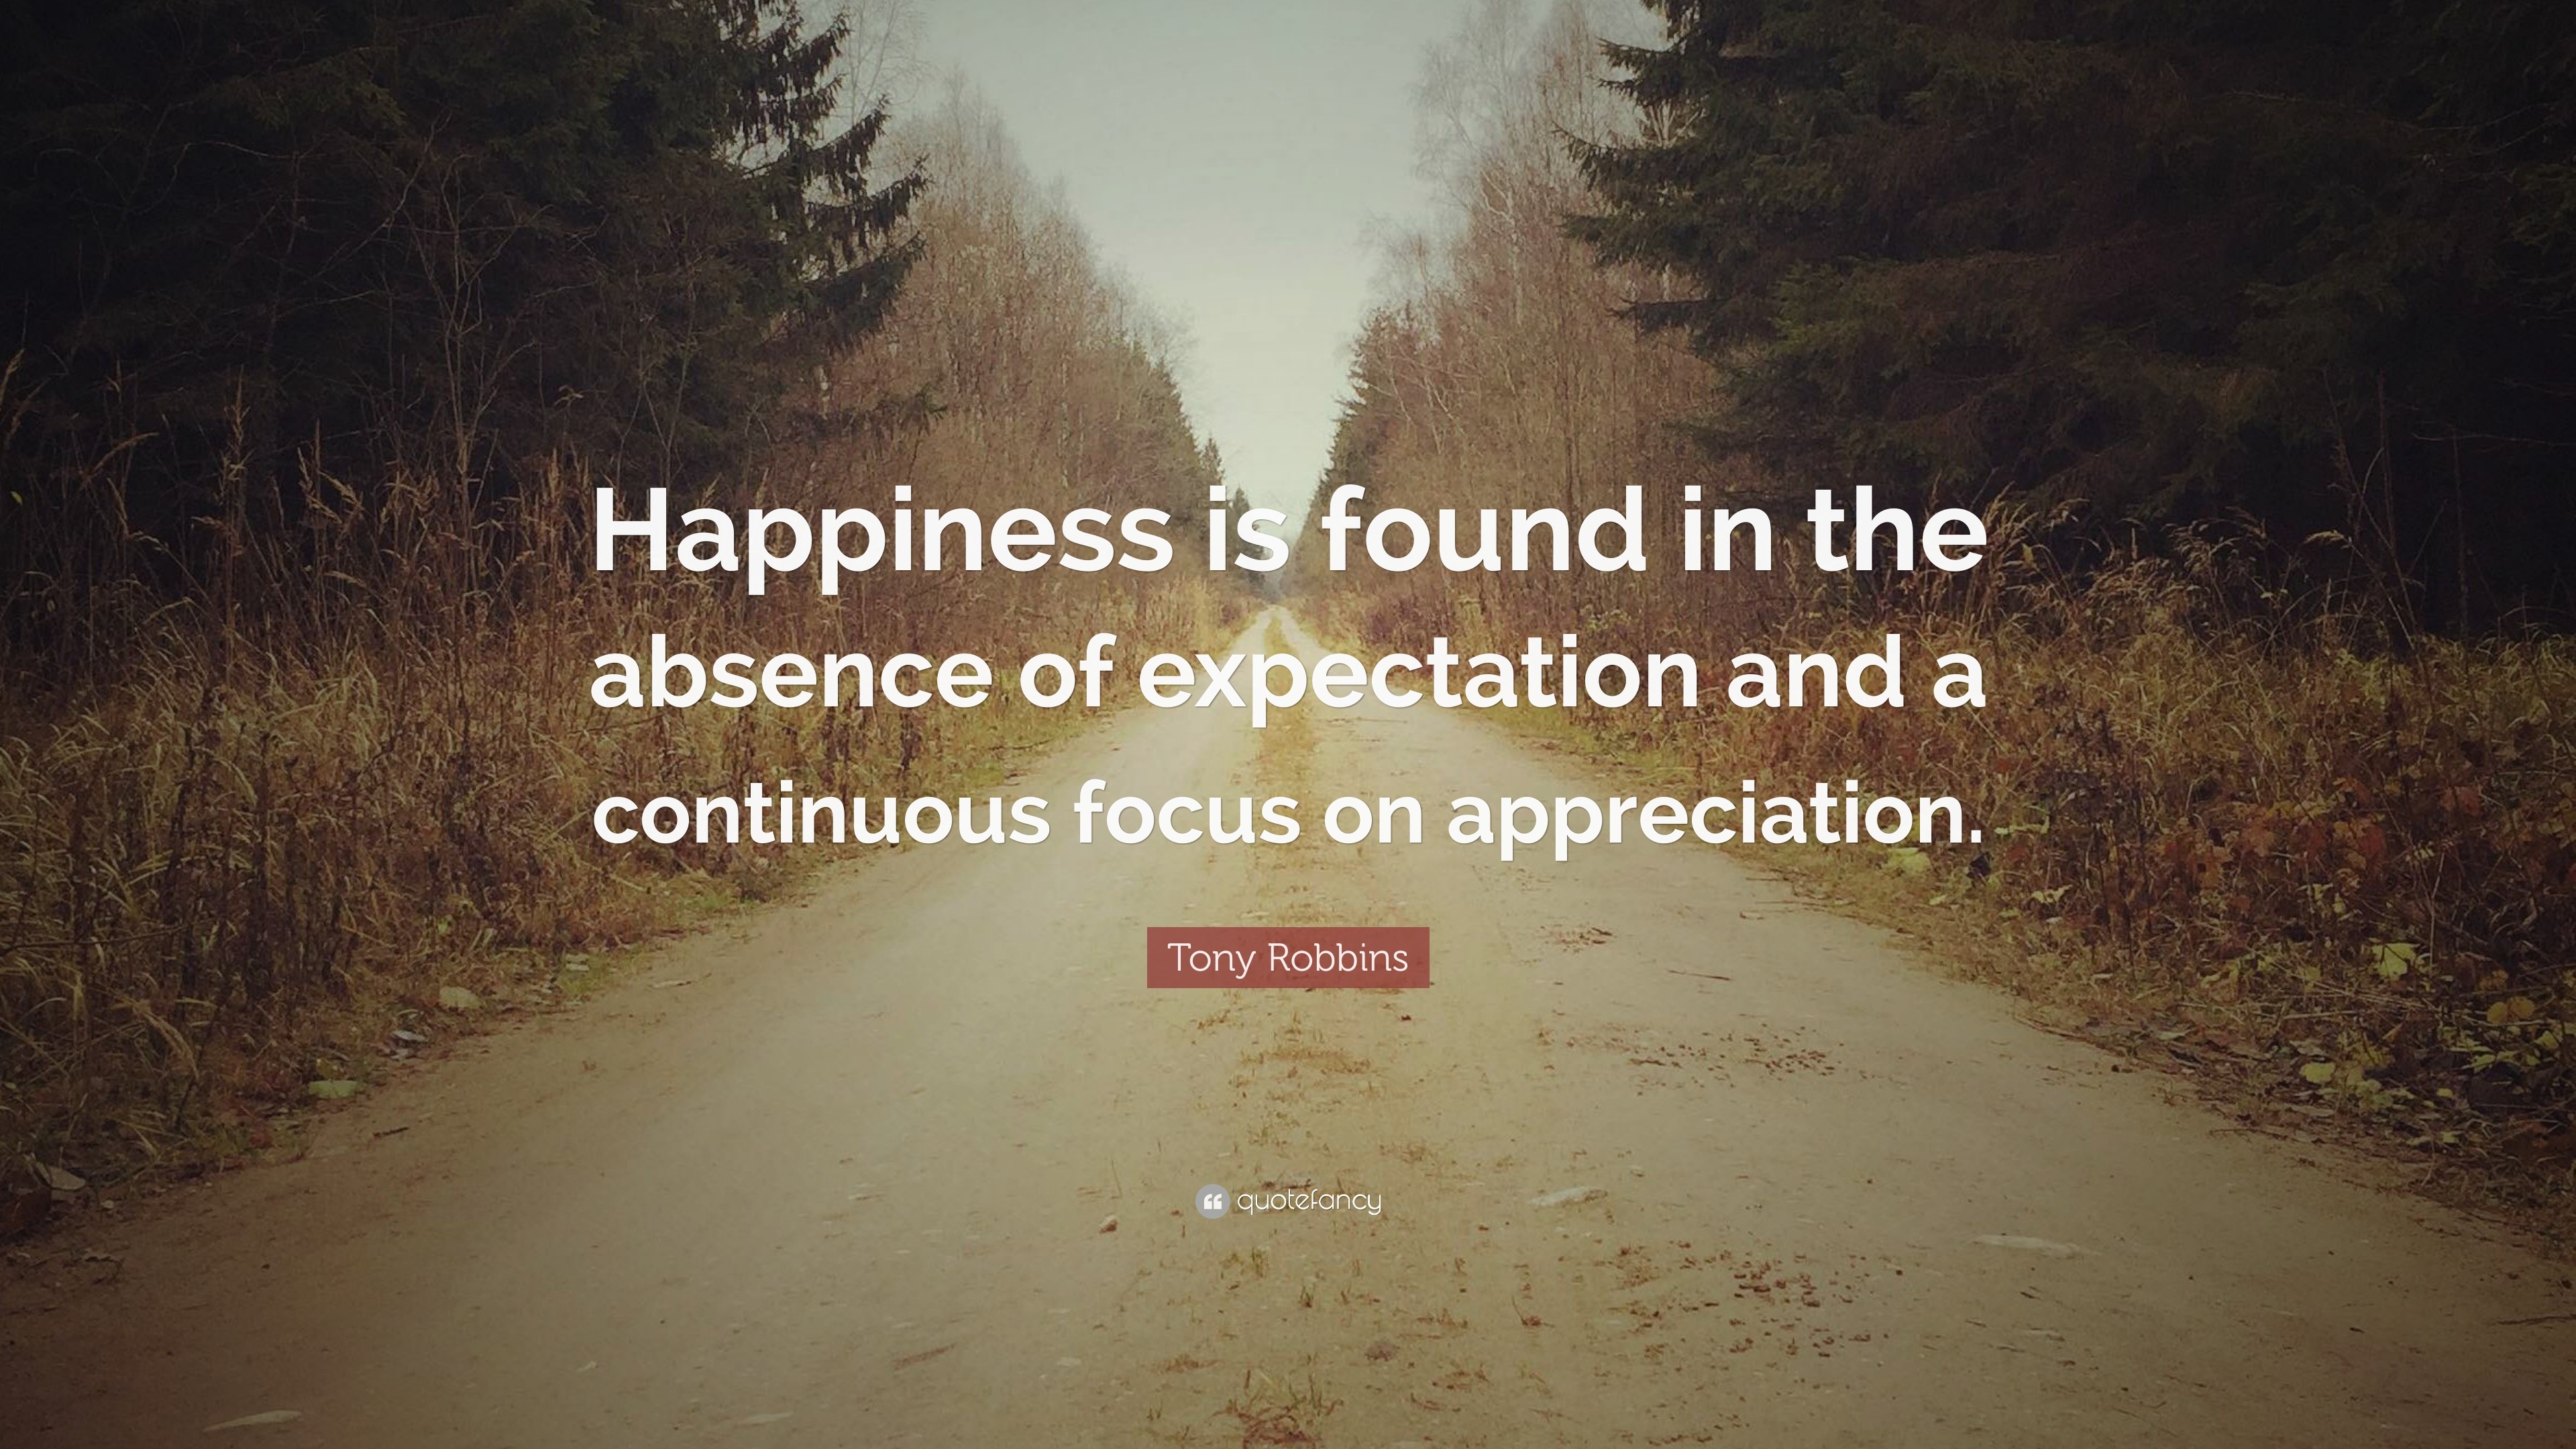 Tony Robbins Quote “Happiness is found in the absence of